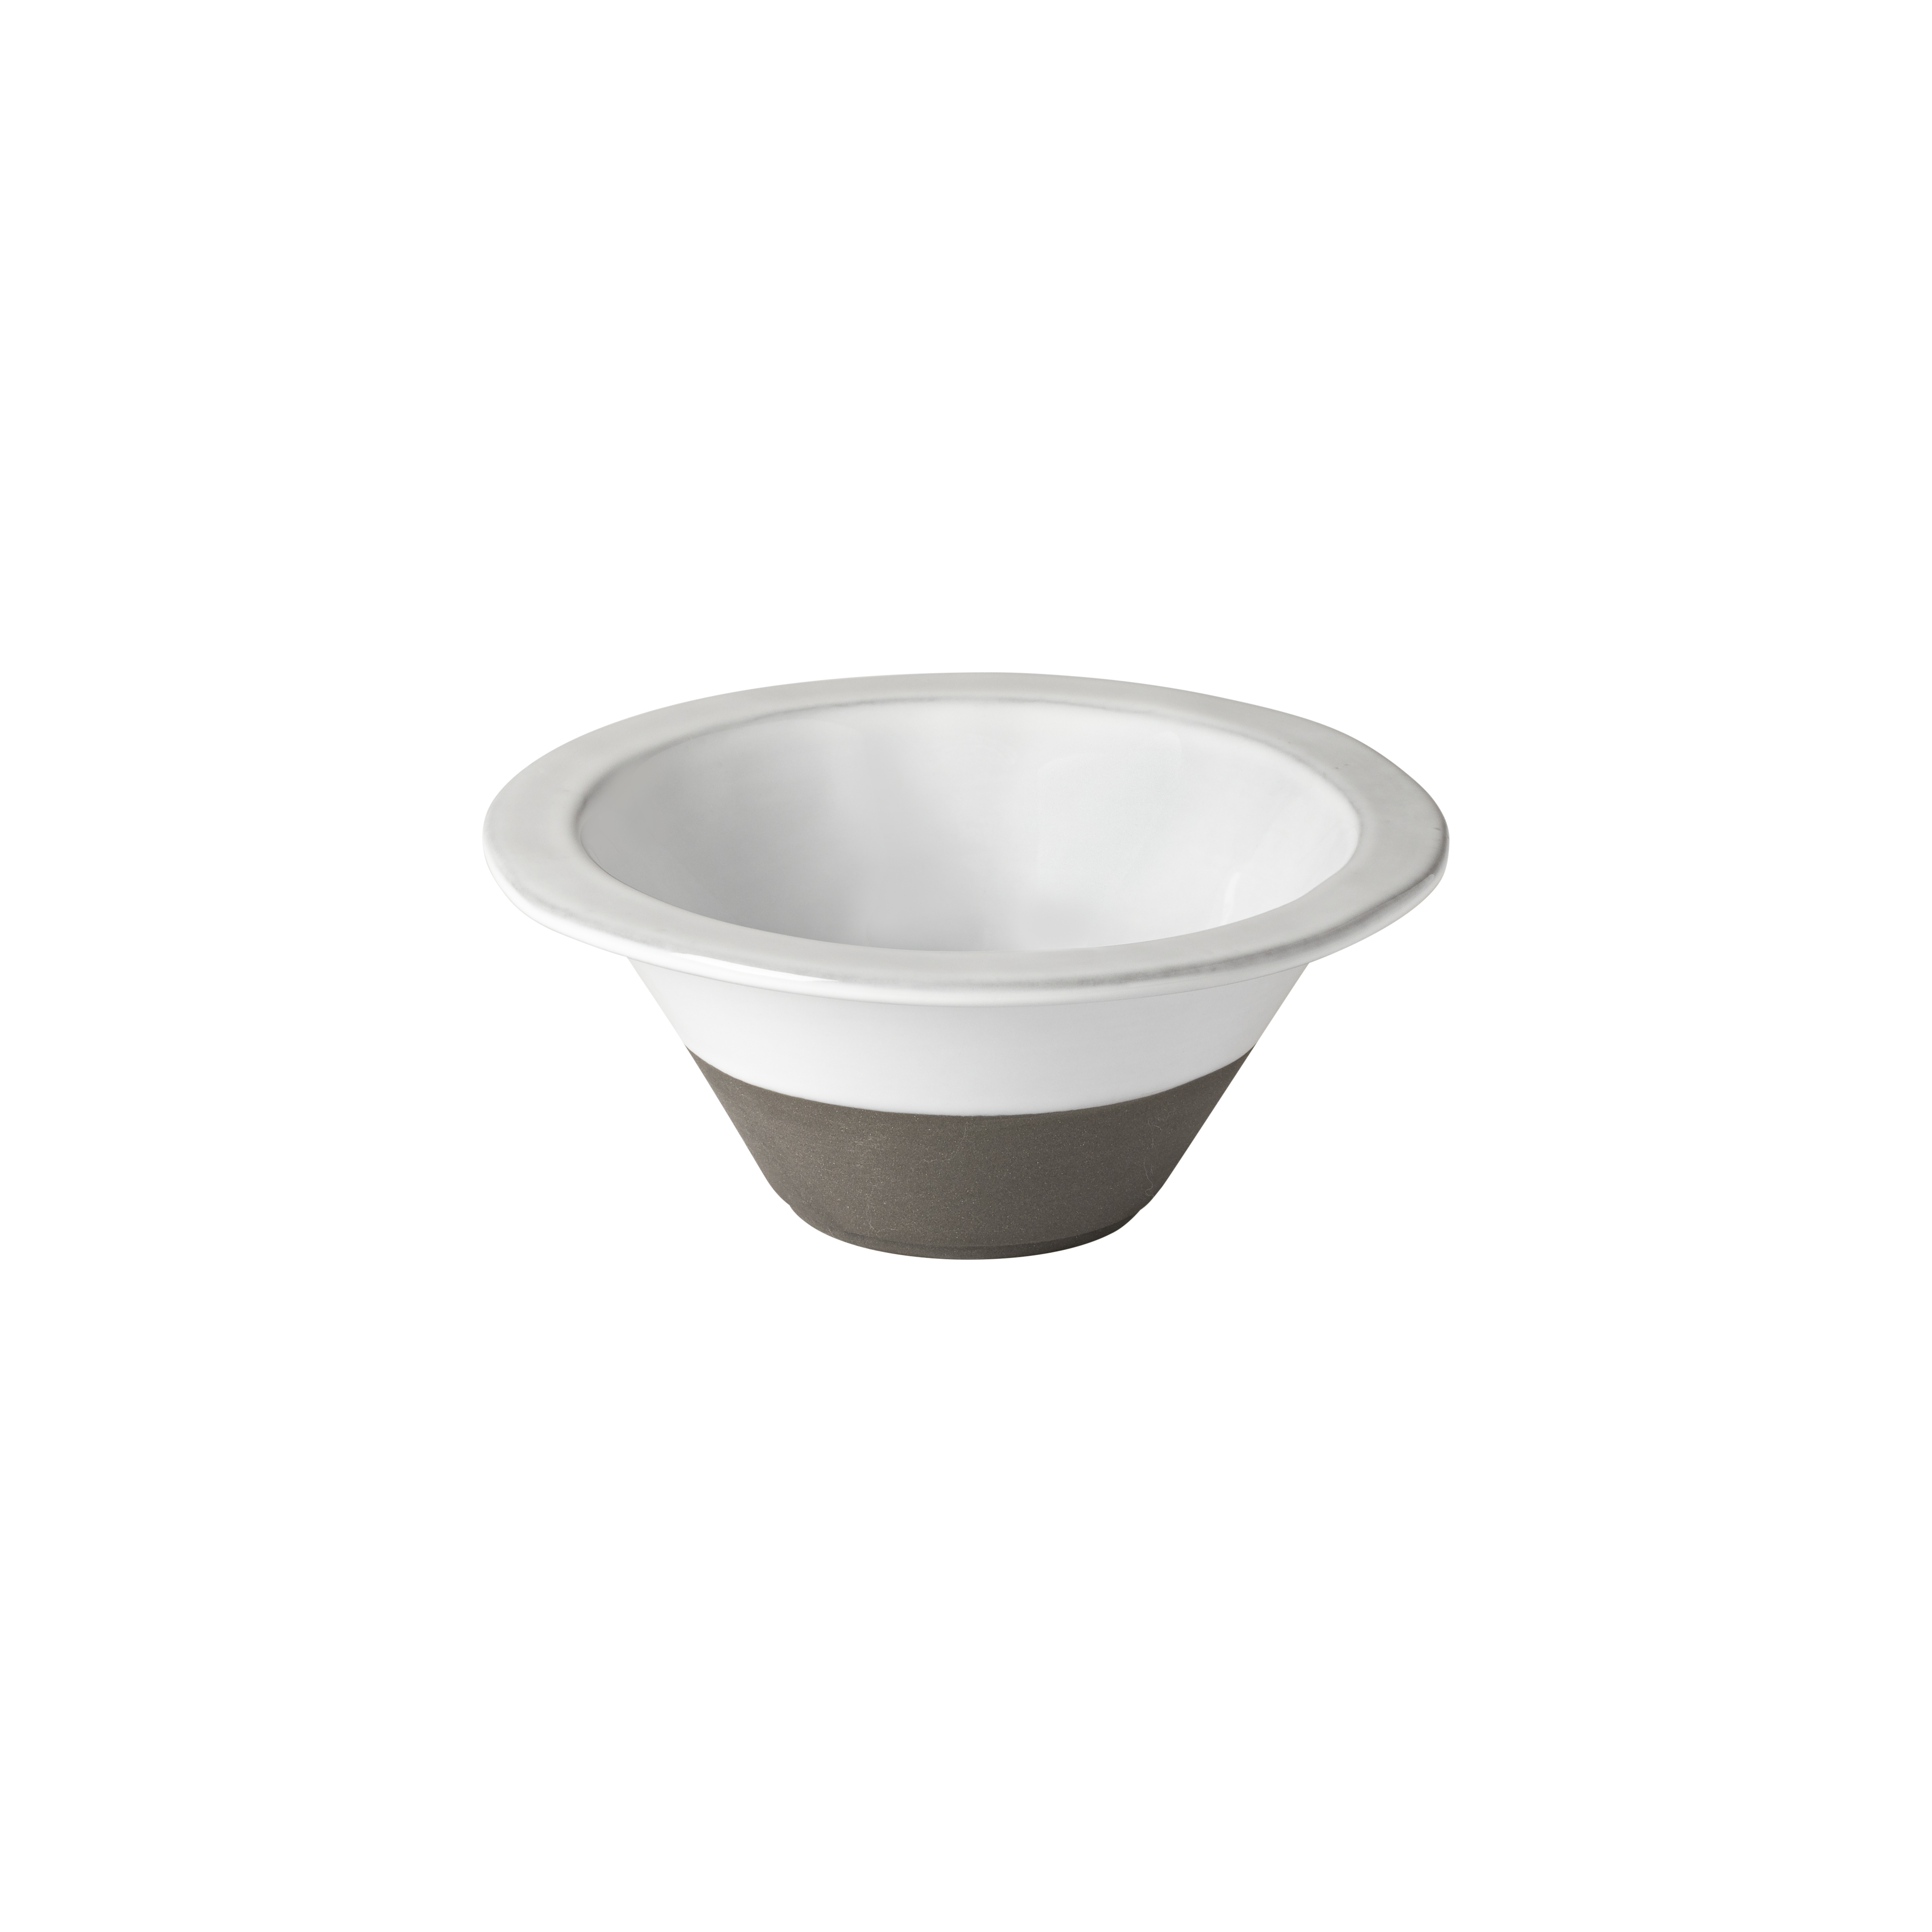 Plano White Soup/cereal Bowl 18cm Gift